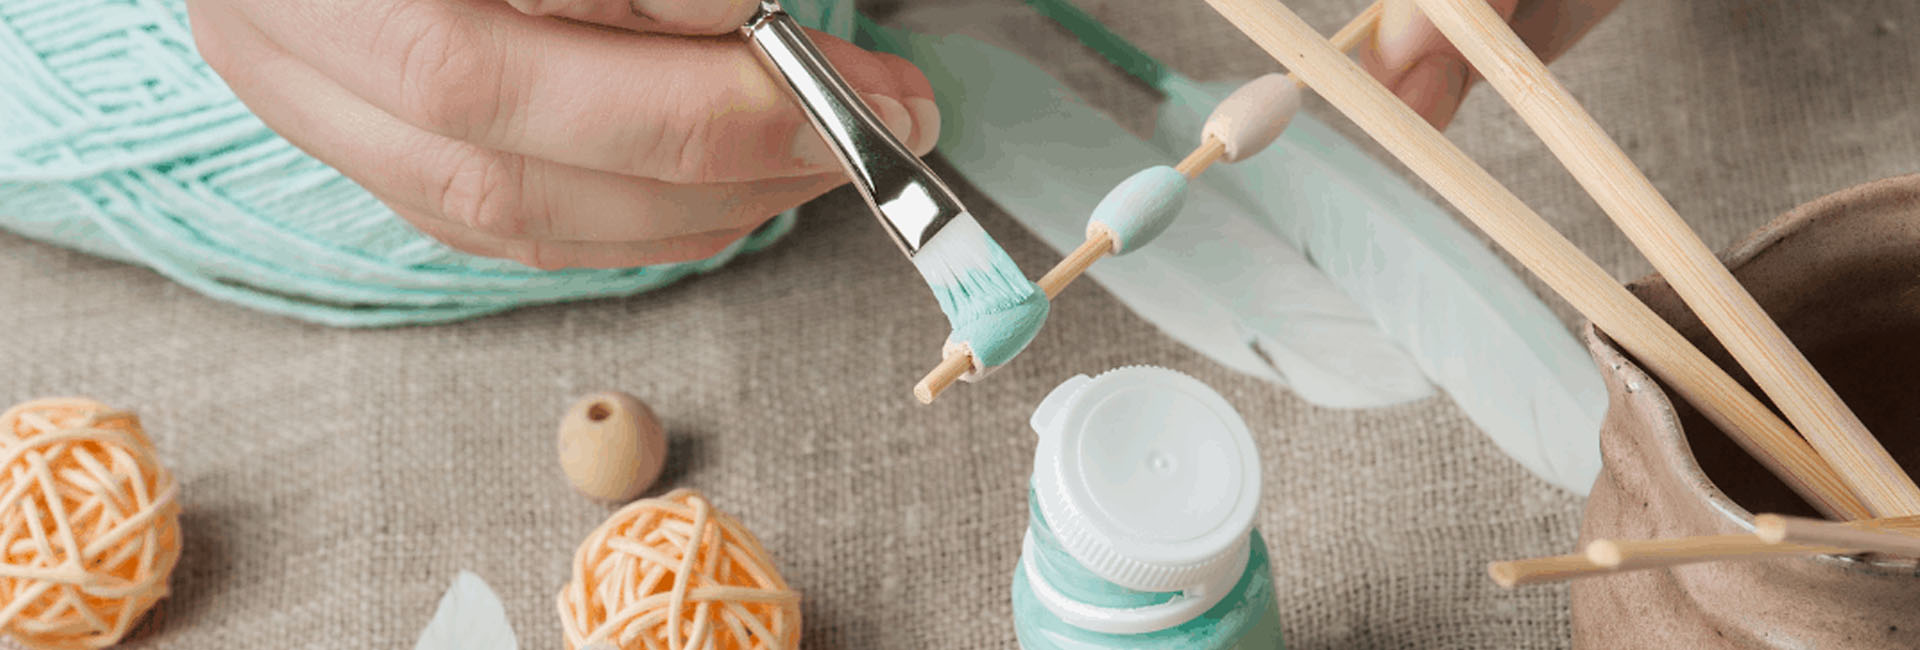 25 Trending DIY Crafts to Make and Sell in 2023 - Webx Blog